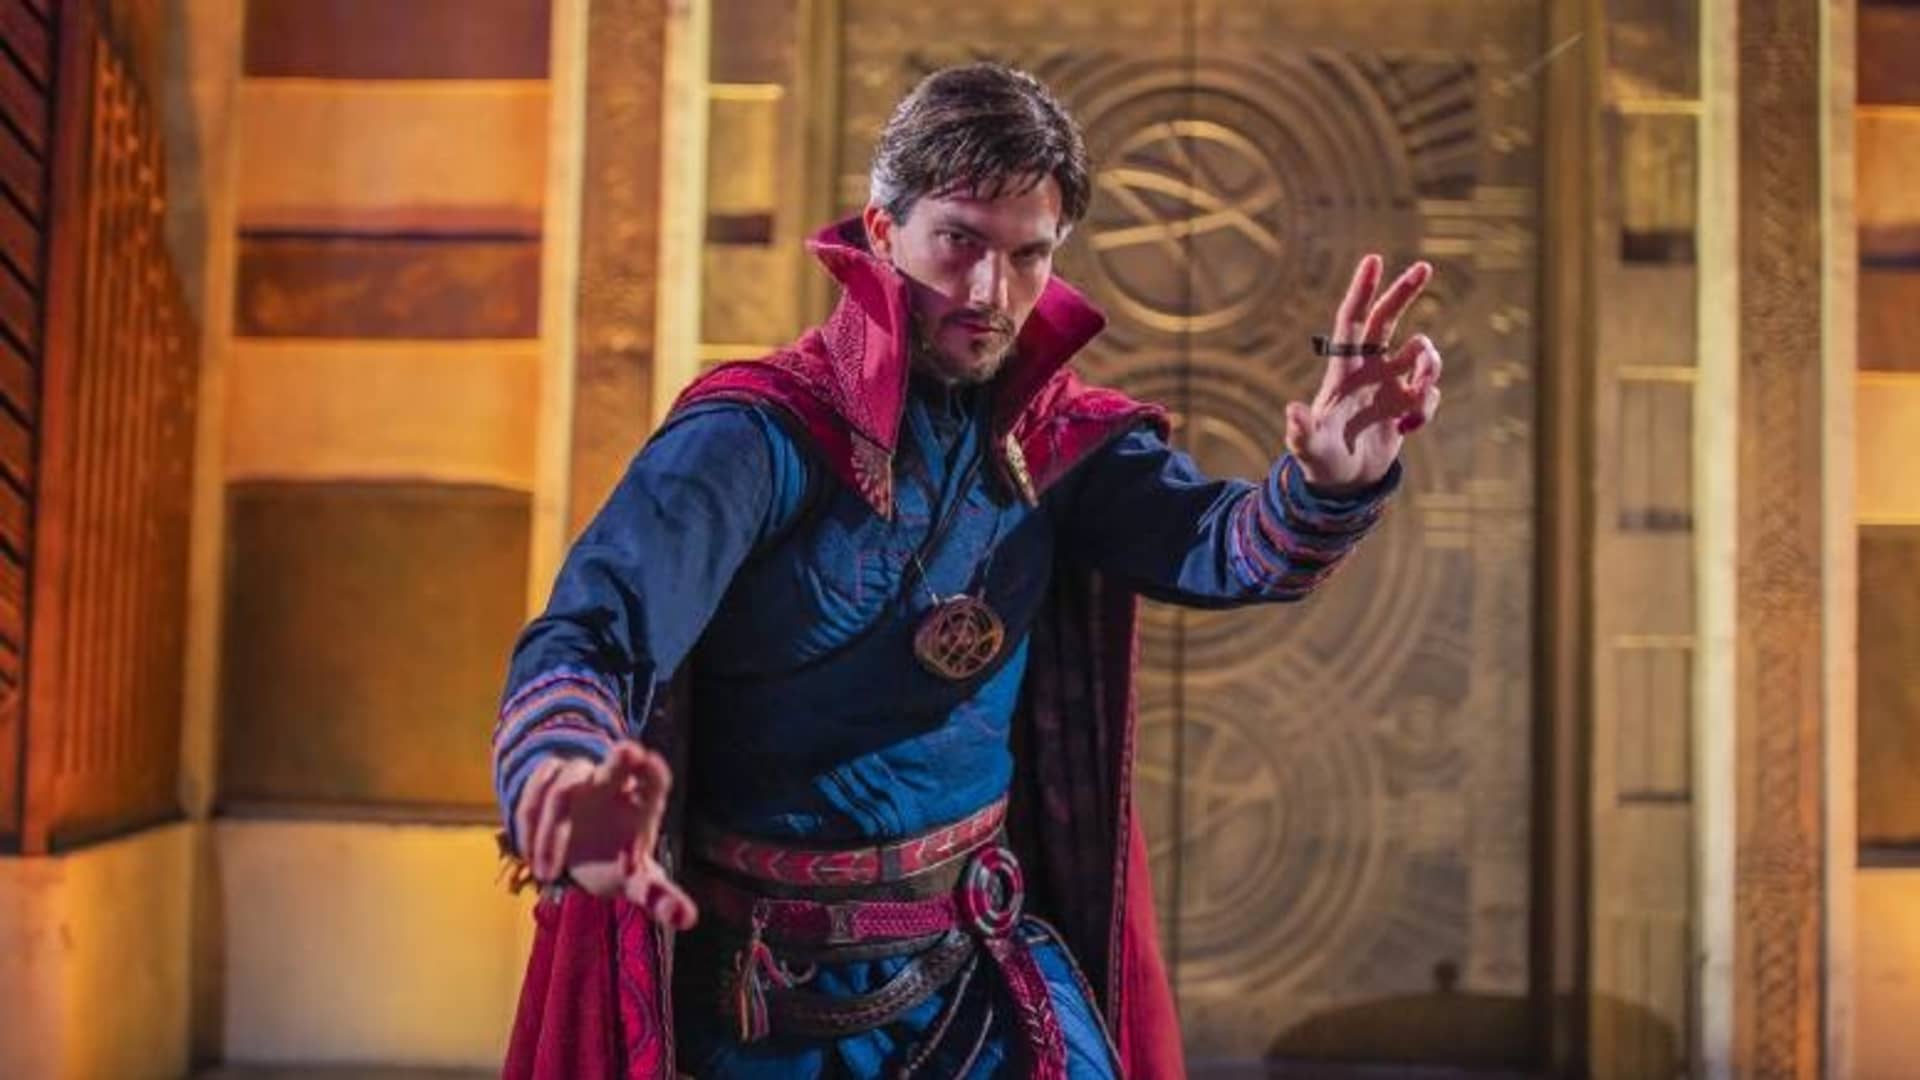 Guests may encounter the Master of Mystic Arts himself as they venture deep into Avengers Campus. From time to time, Doctor Strange steps forth through an inter-dimensional portal to engage guests with illusions, sorcery and tales to astonish from his collection of mysterious relics.